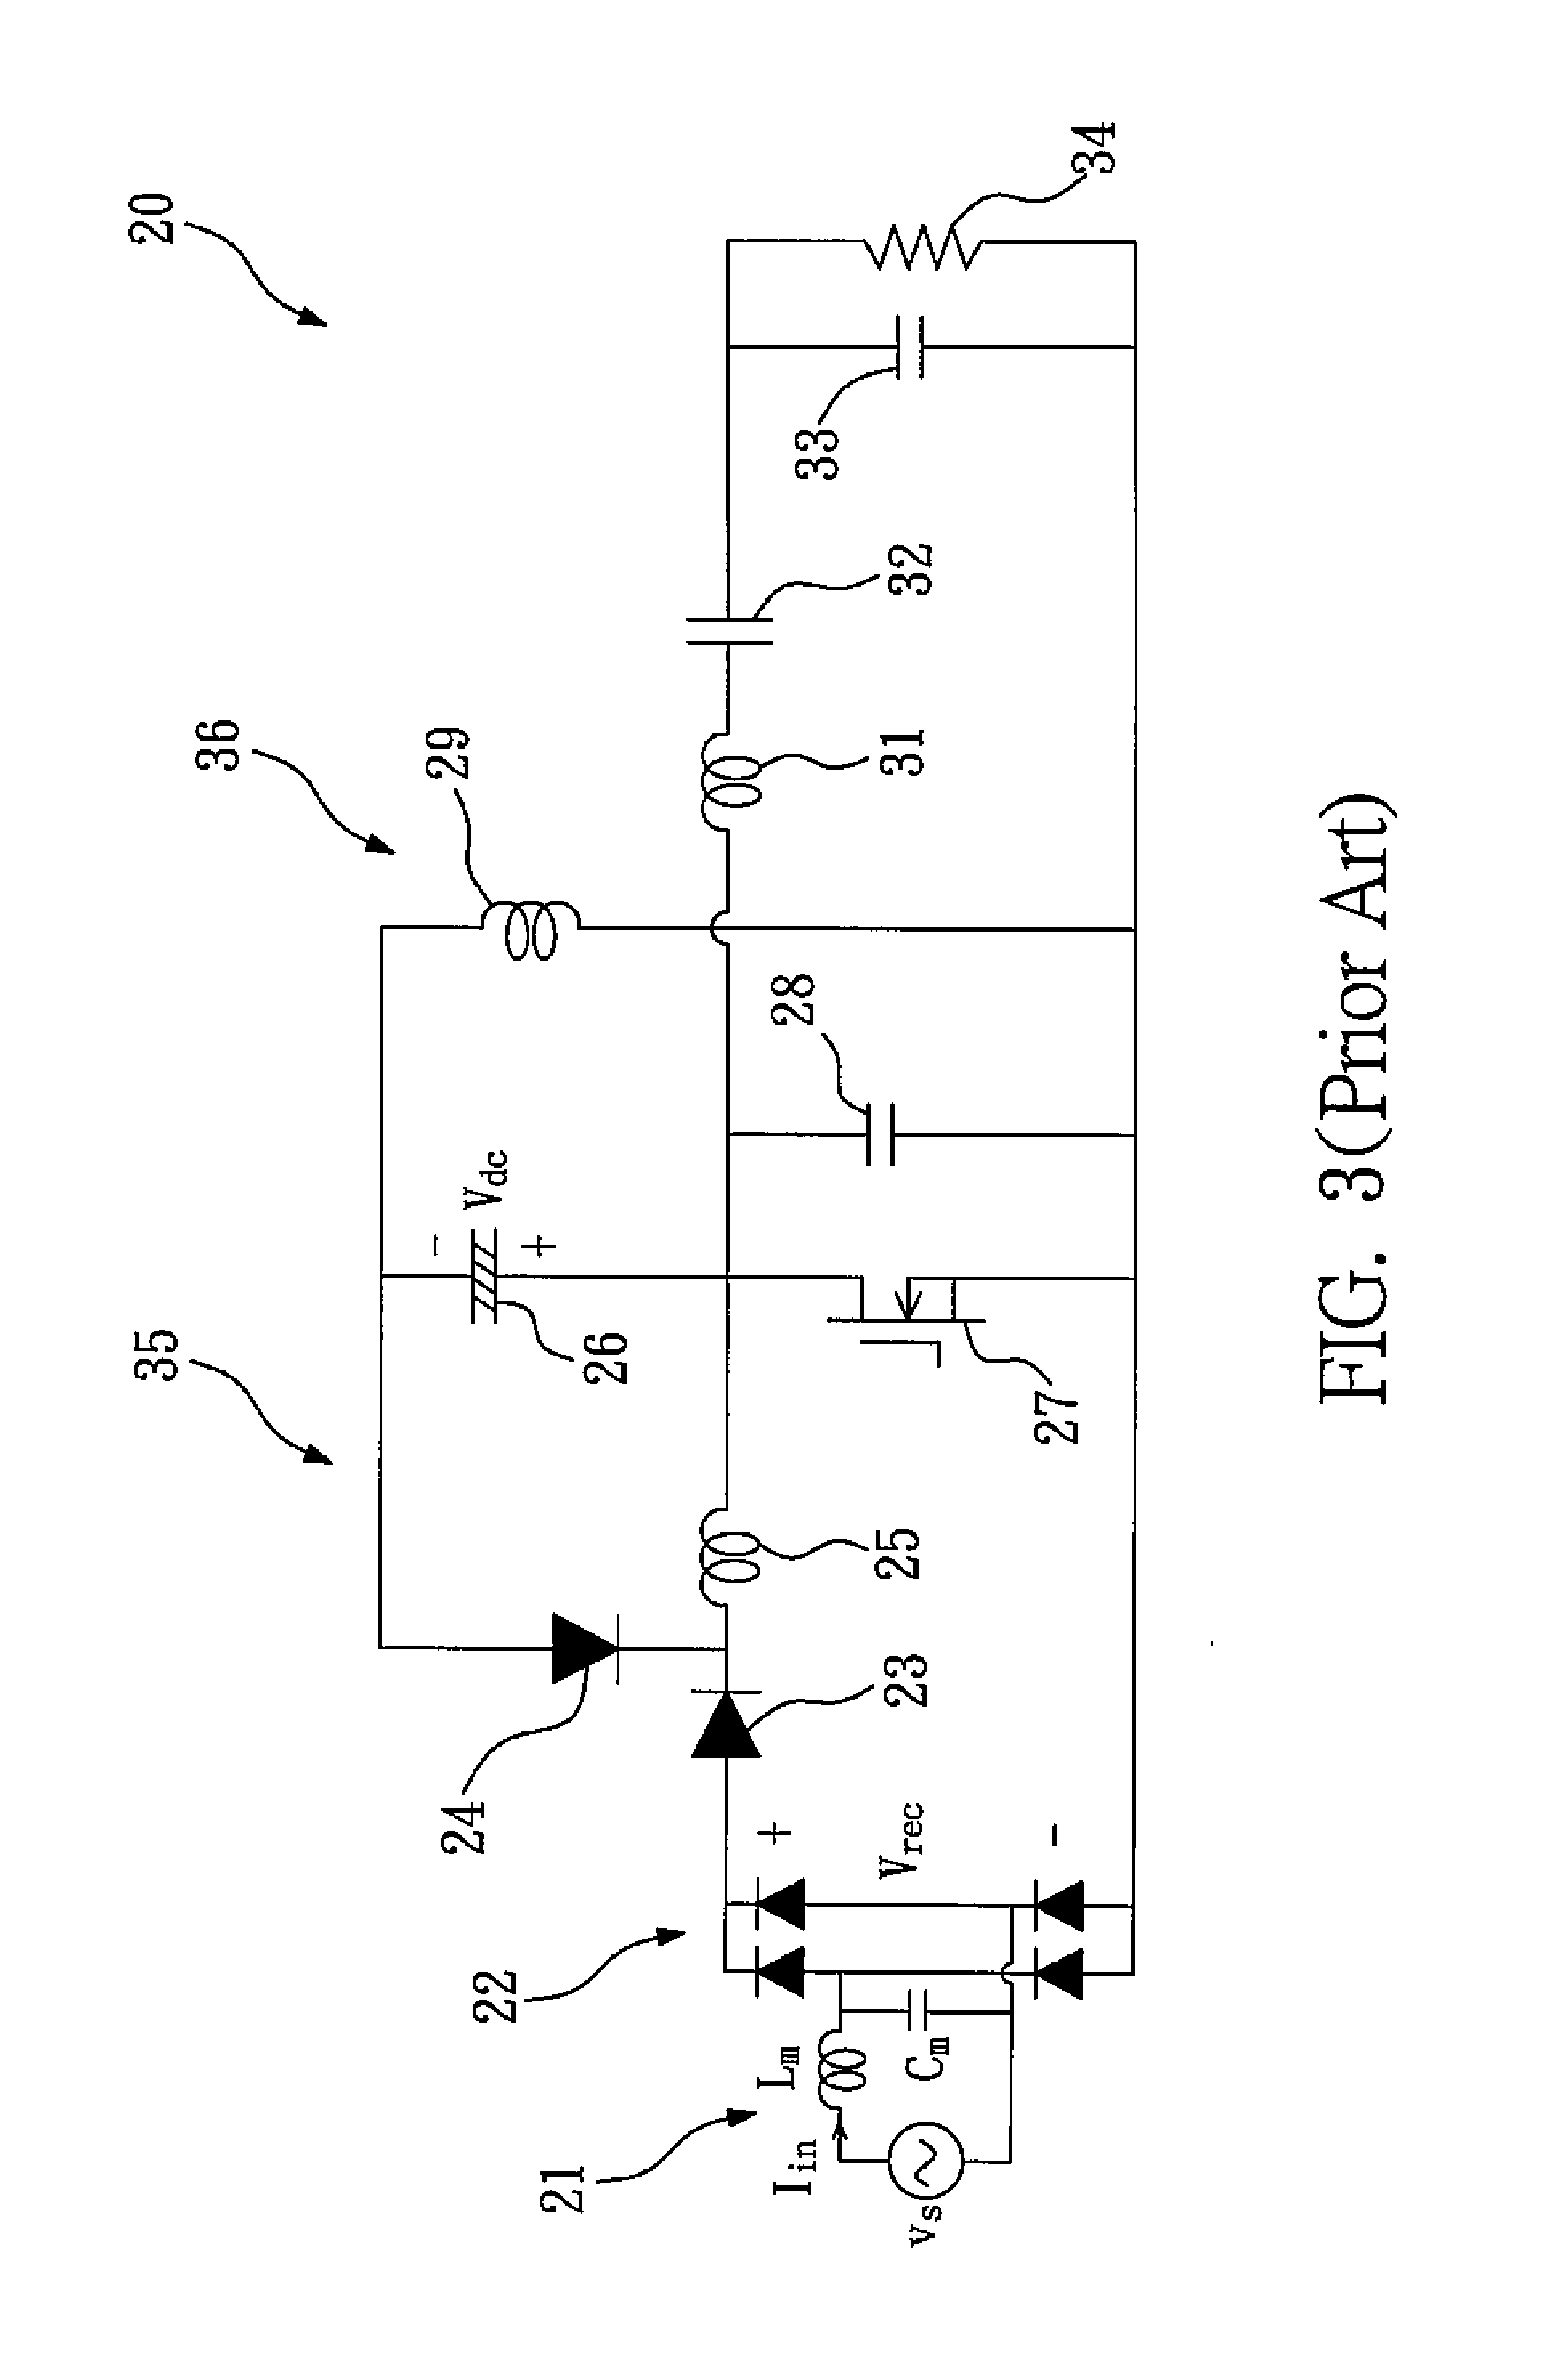 Single-stage zero-current switching driving circuit for ultrasonic motor